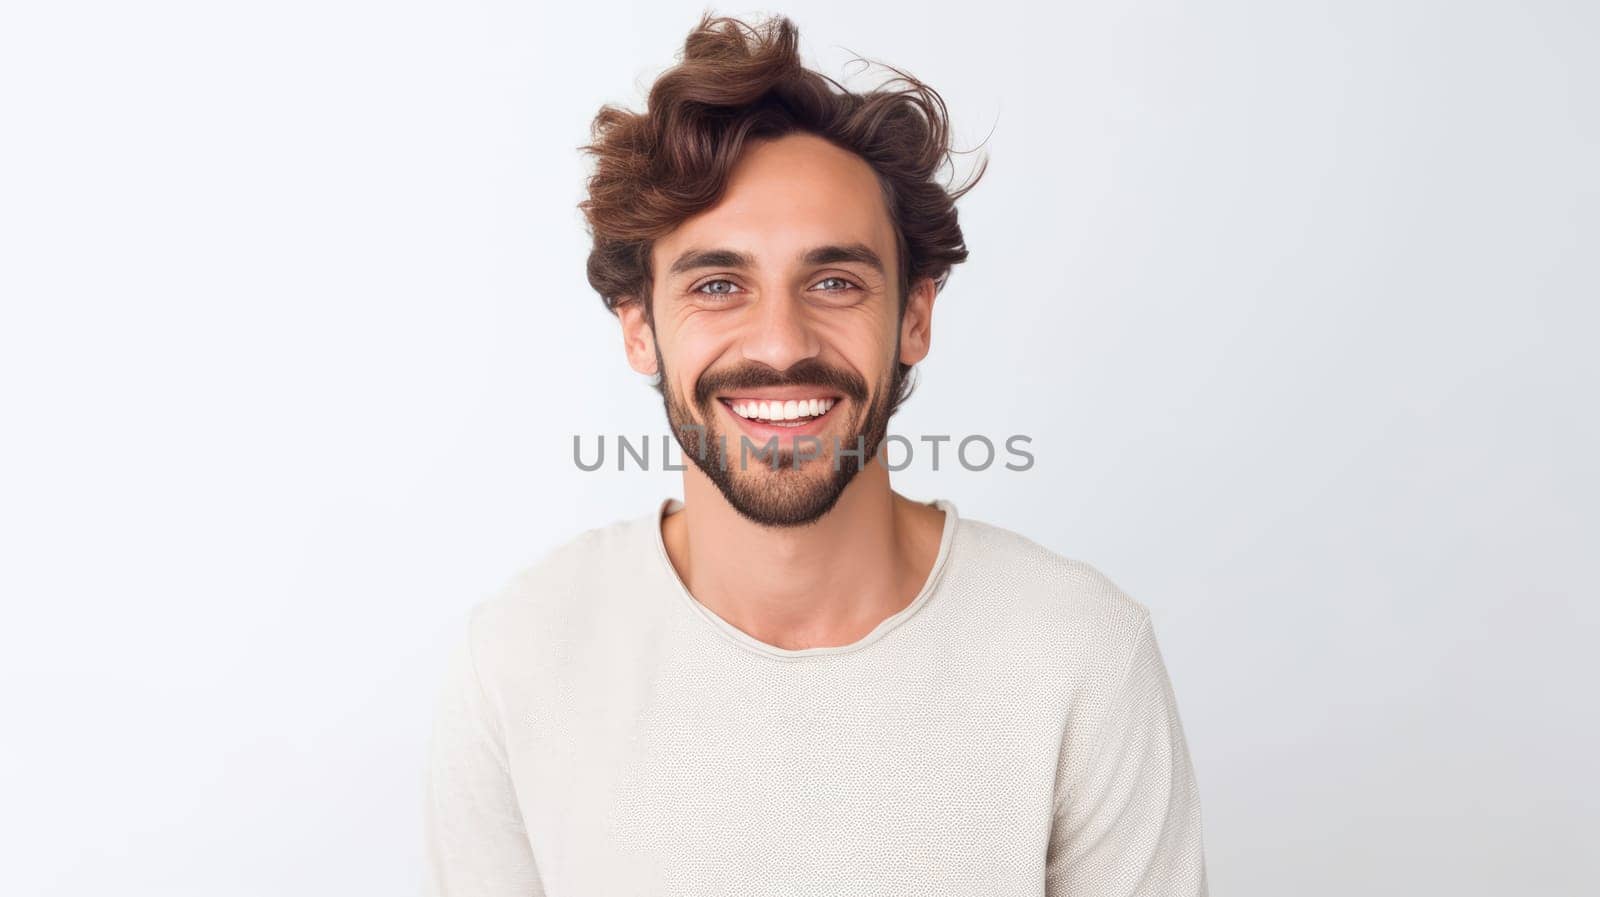 Portrait of happy smiling guy with white teeth looking at camera on white background. by JuliaDorian